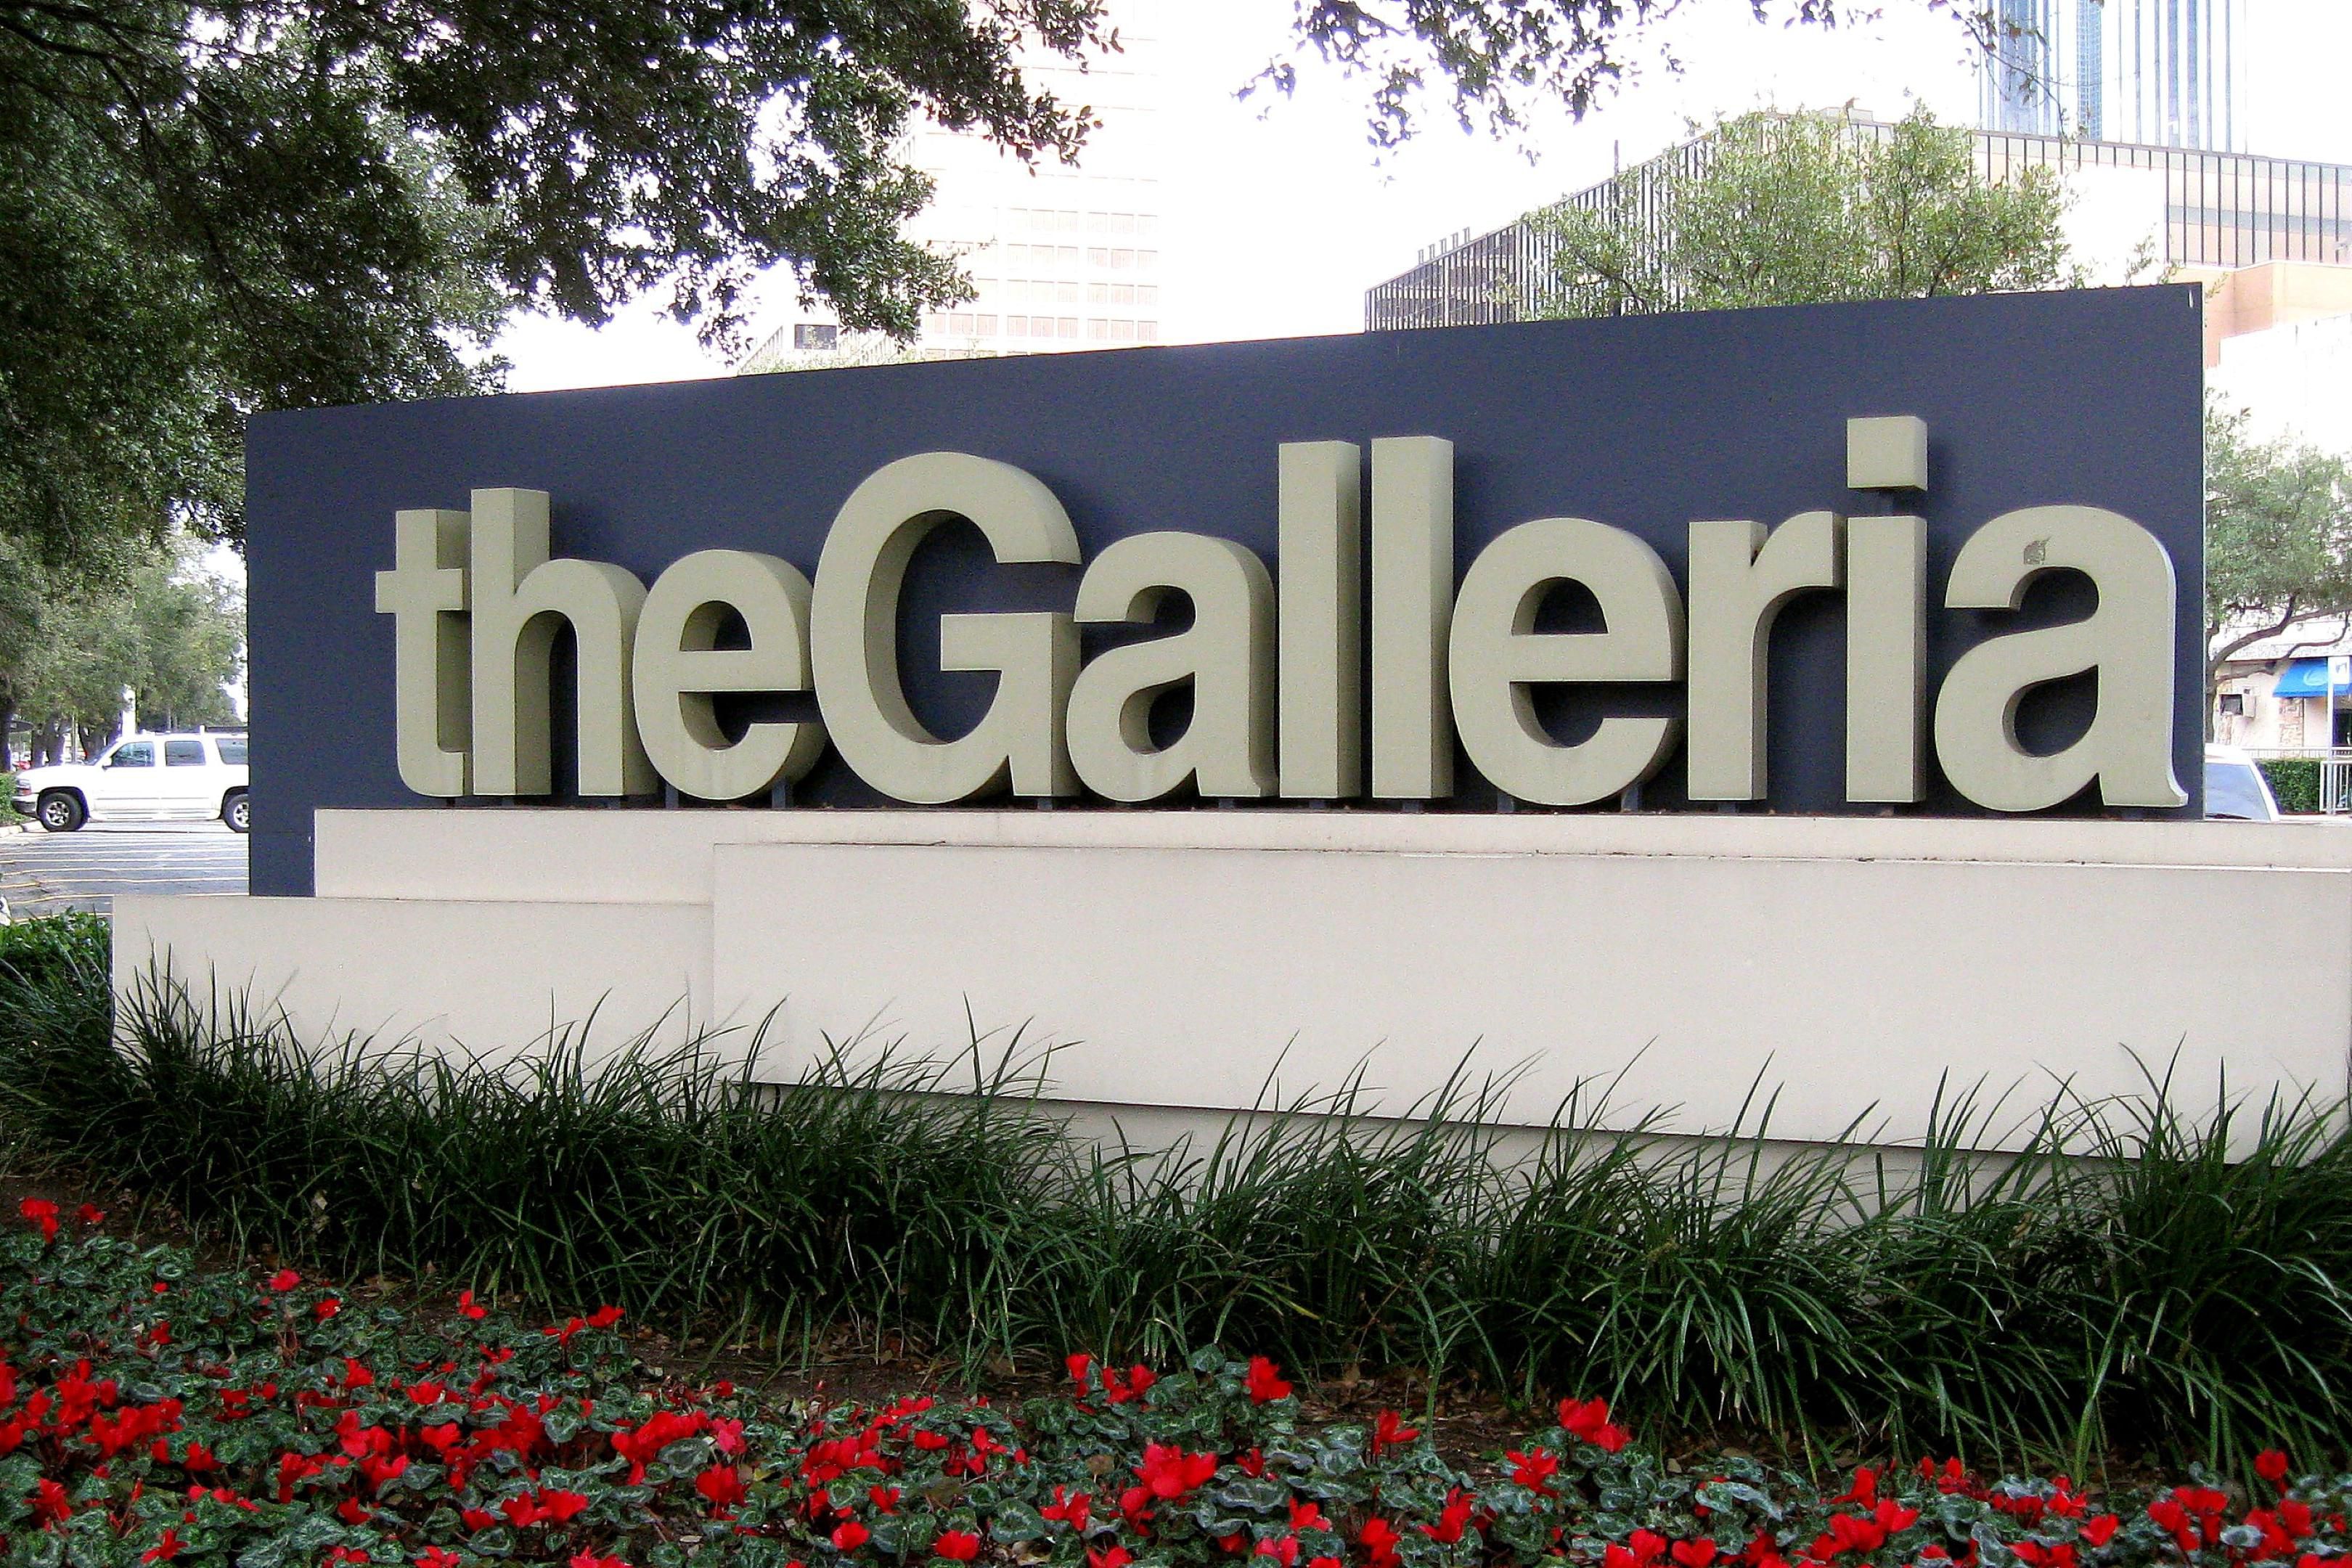 Enjoy some of the best shopping and dining that Houston has to offer. The Galleria is Texas’ largest shopping destination only a couple of minutes from the hotel.